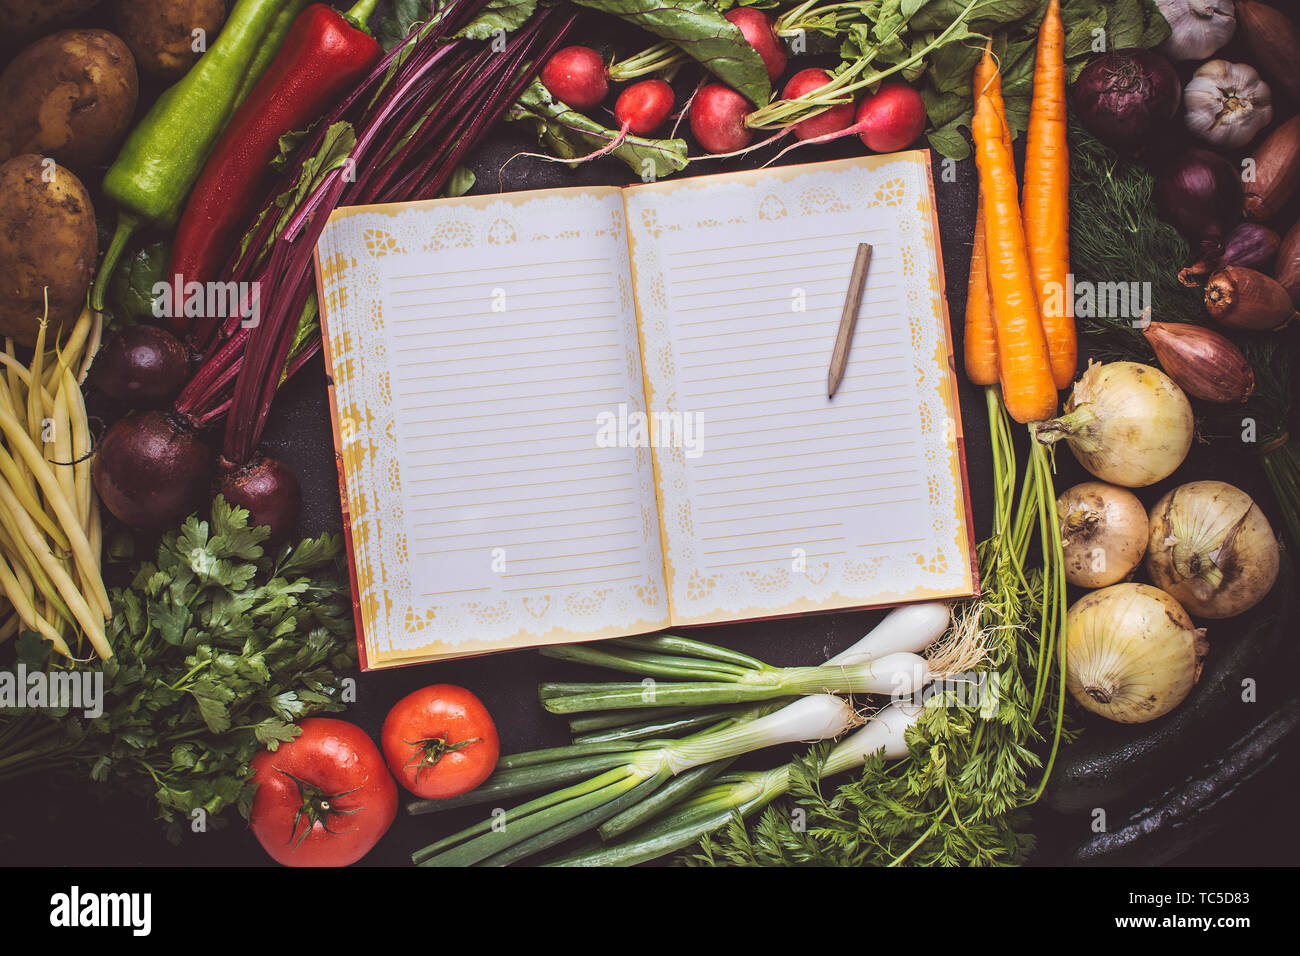 Blank Recipe Empty Cook Book Mockup with Fresh Vegetables. Vegan Raw Food. Healthy Eating Concept with Copy Space. Stock Photo